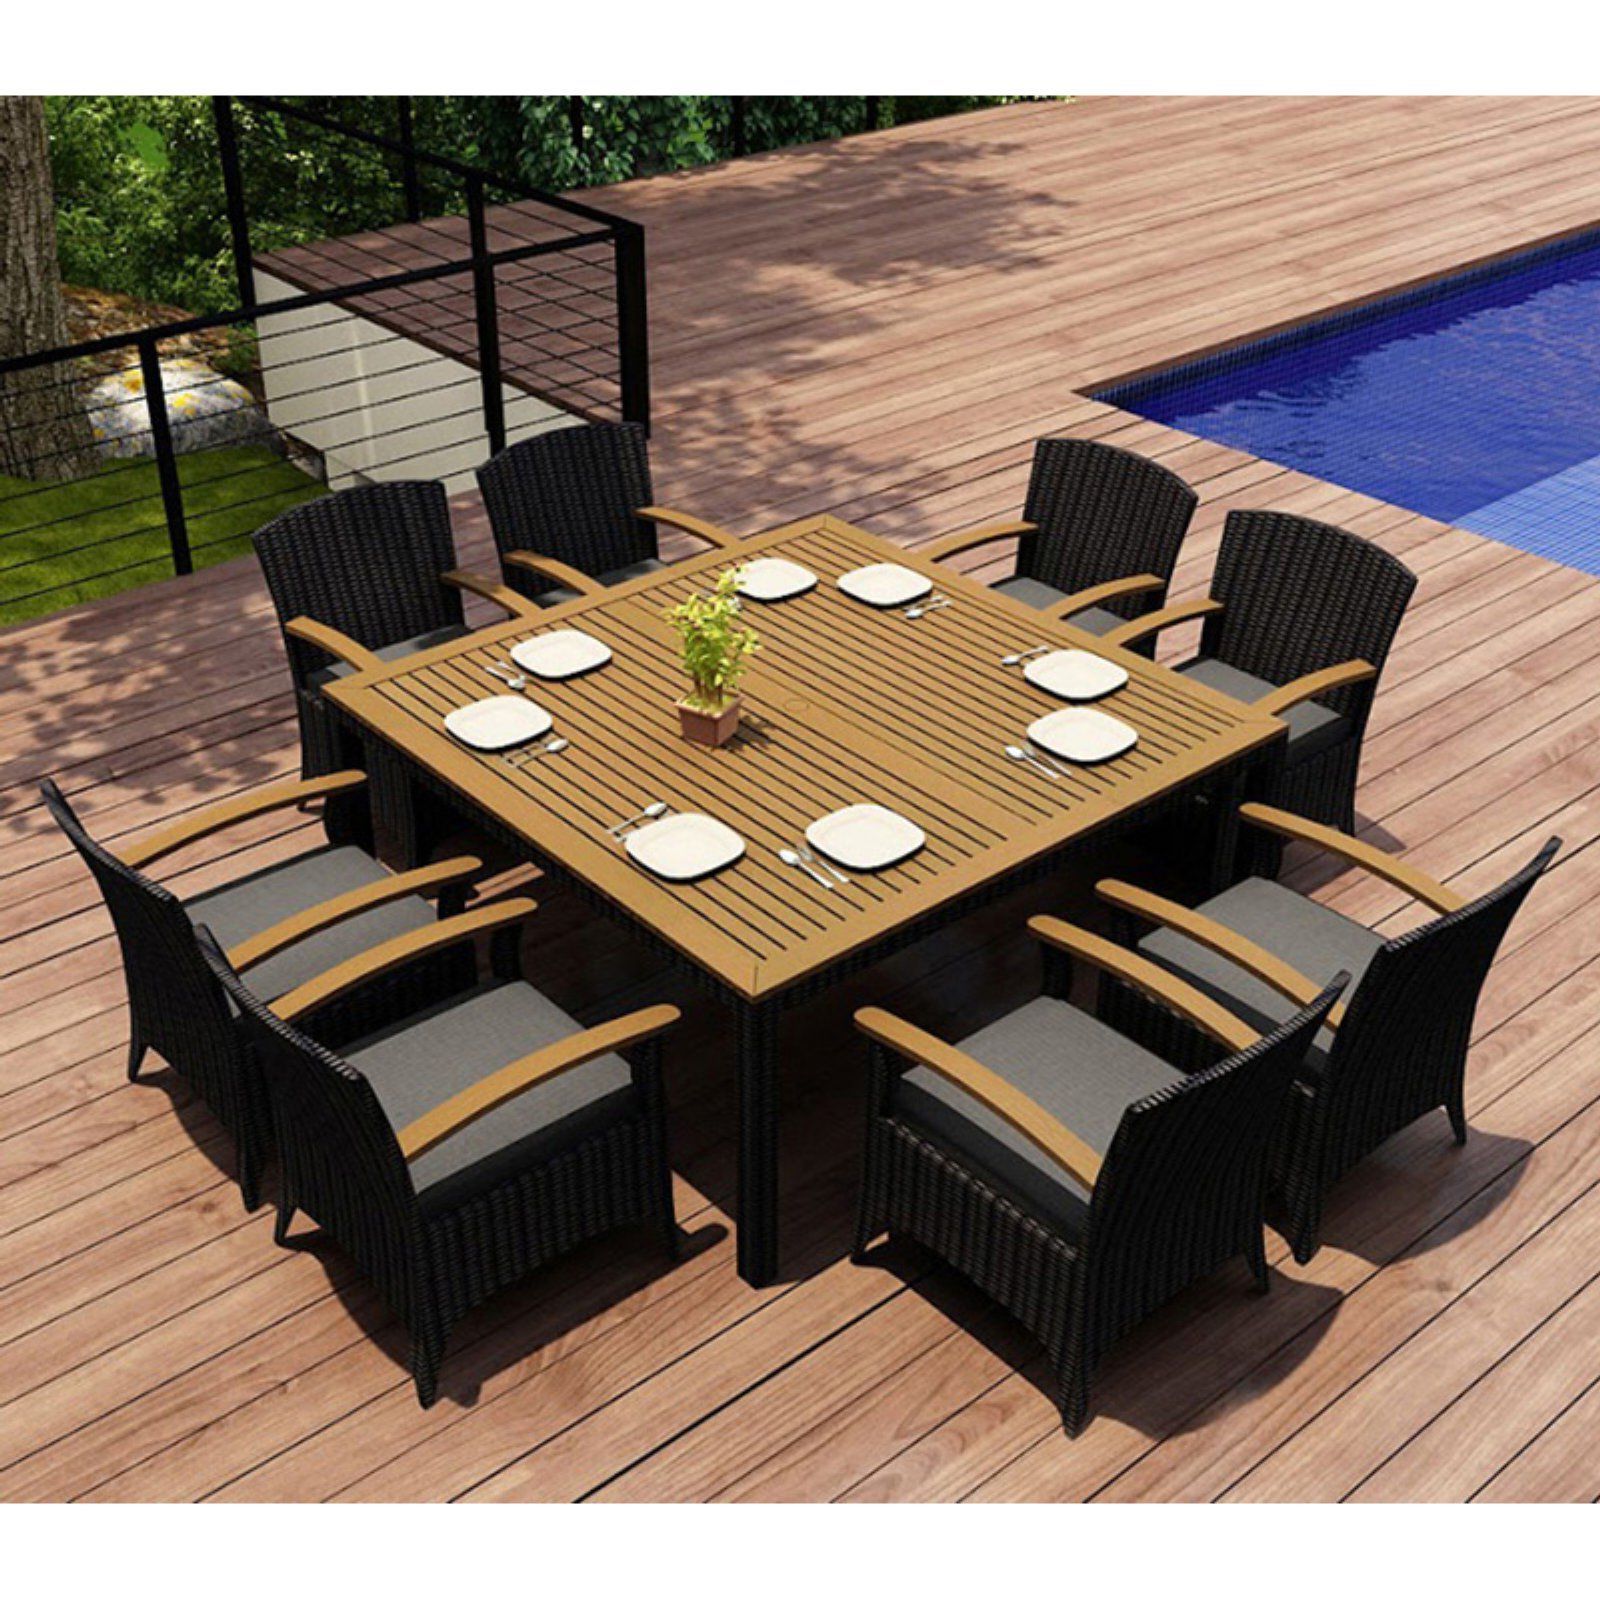 Wicker Square 9 Piece Patio Dining Sets With Best And Newest Outdoor Harmonia Living Arbor 9 Piece Square Dining Set With Arm Chair (View 1 of 15)